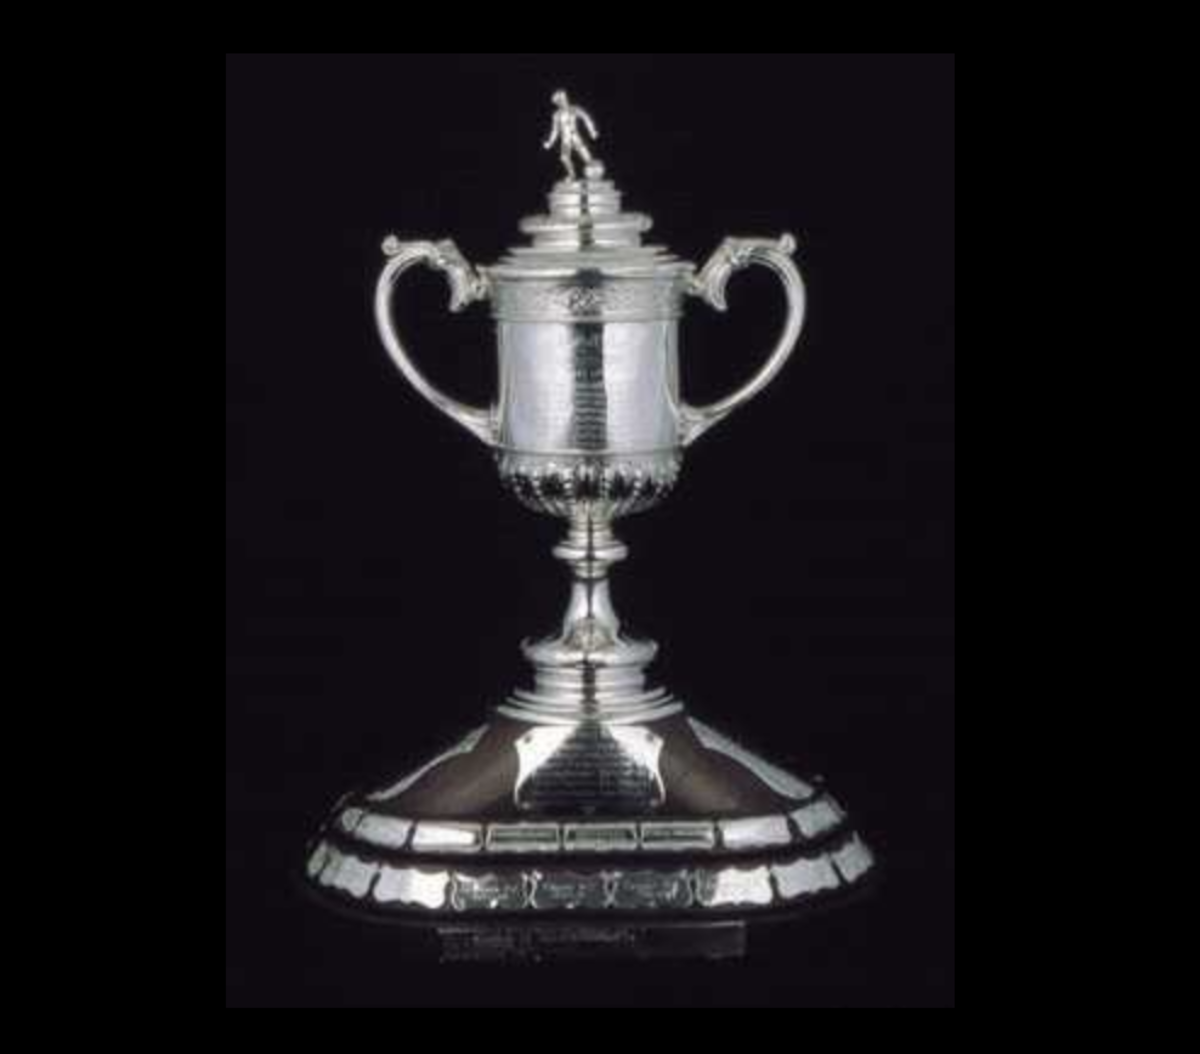 A photo of the Scottish Cup.